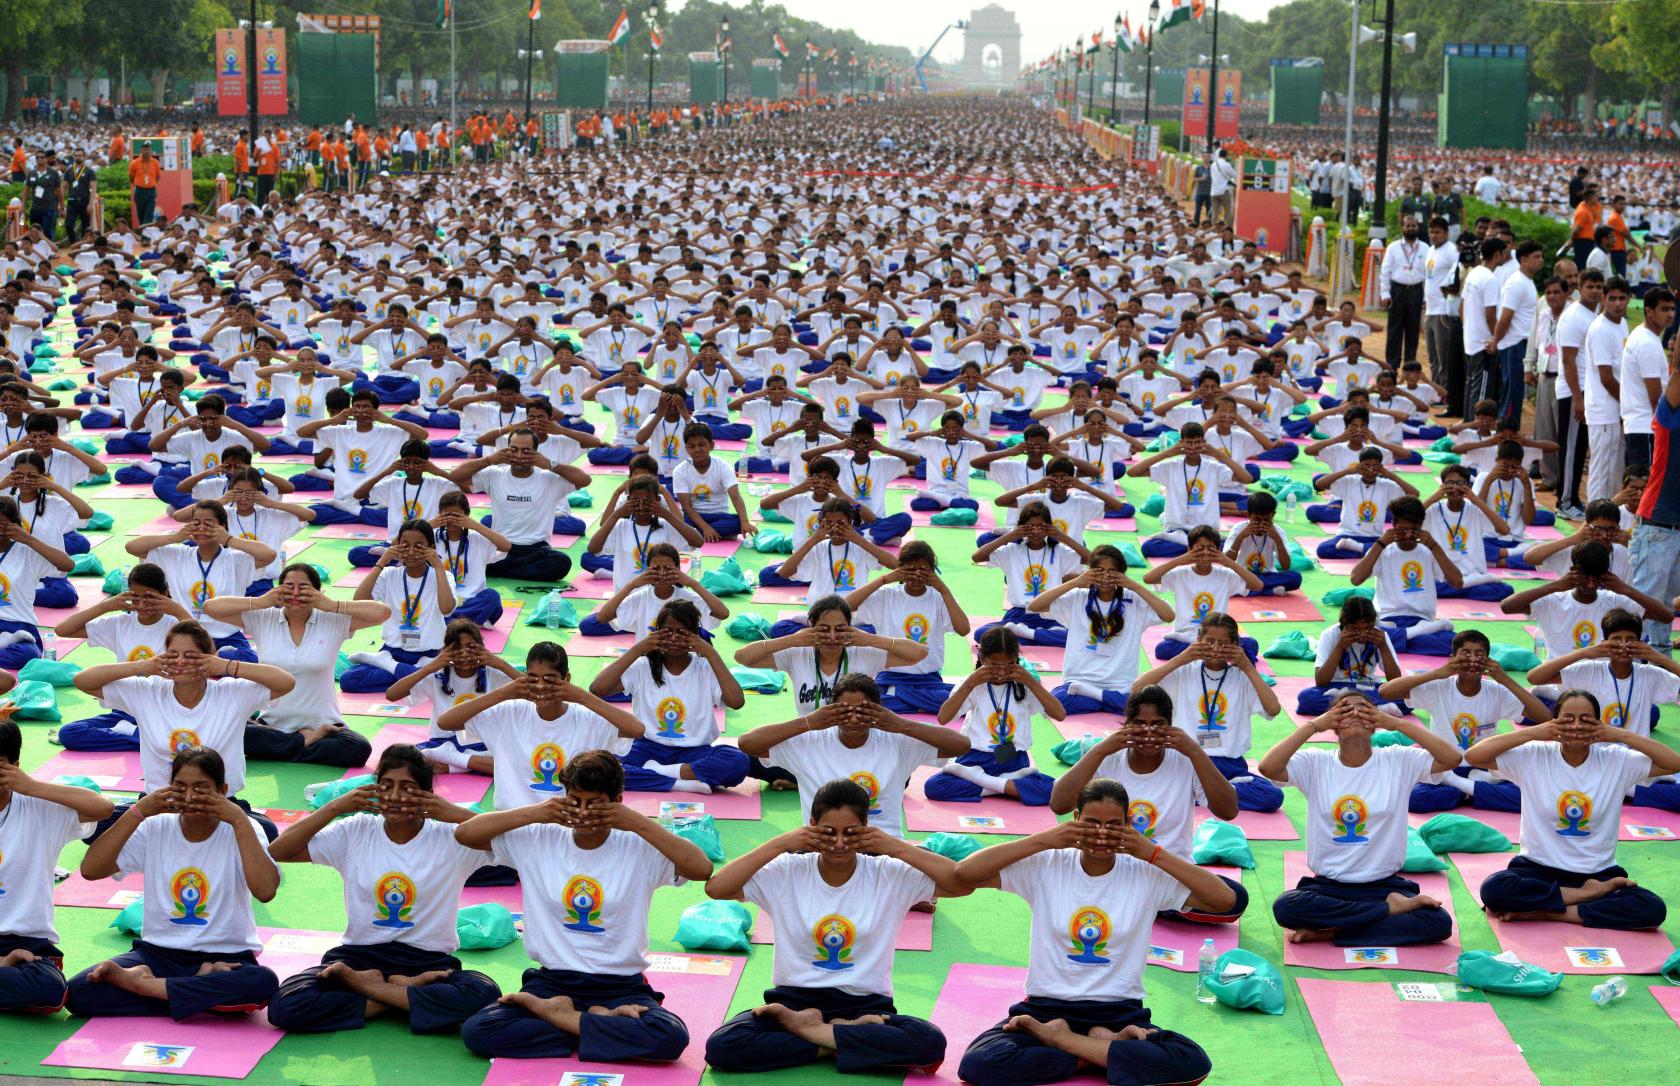 50,000 yoga professionals to be certified in 3 years – The Hindu